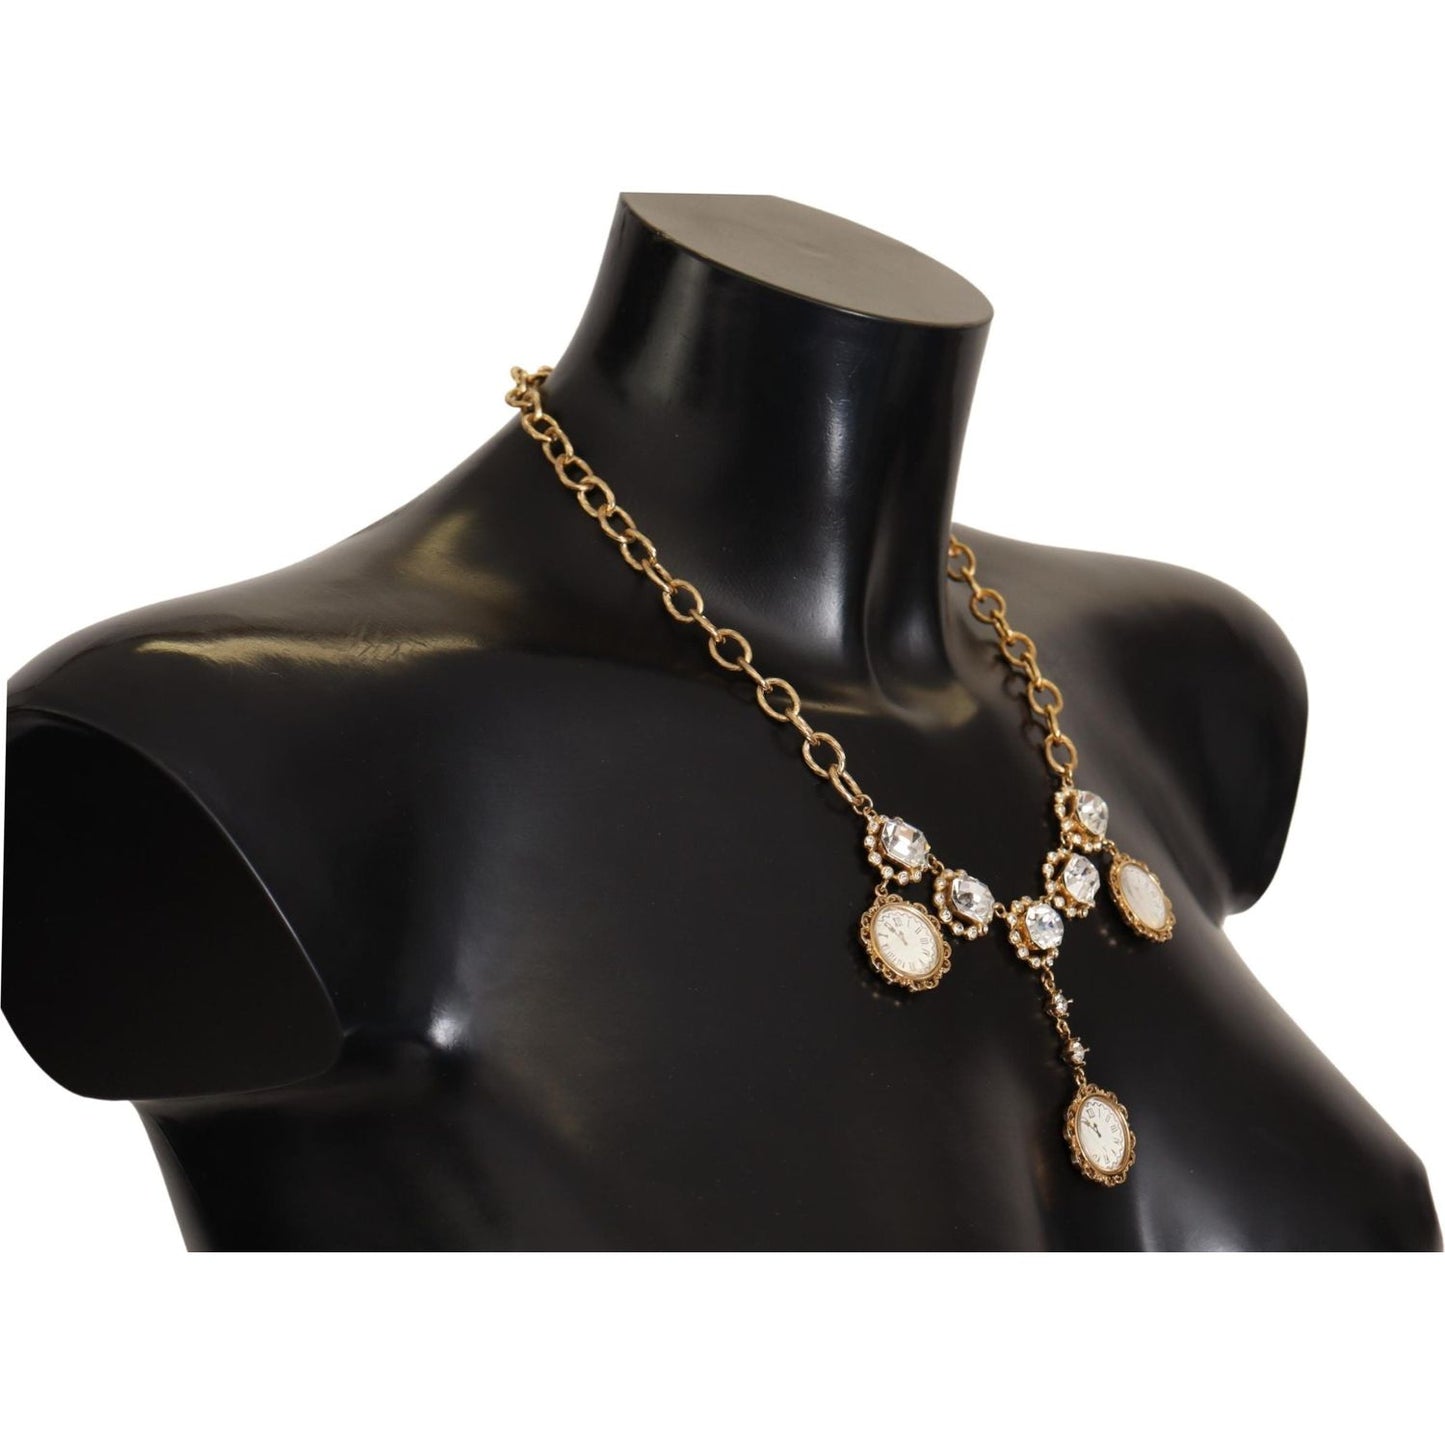 Dolce & Gabbana Elegant Timeless Statement Necklace WOMAN NECKLACE gold-clock-statement-crystal-chain-necklace